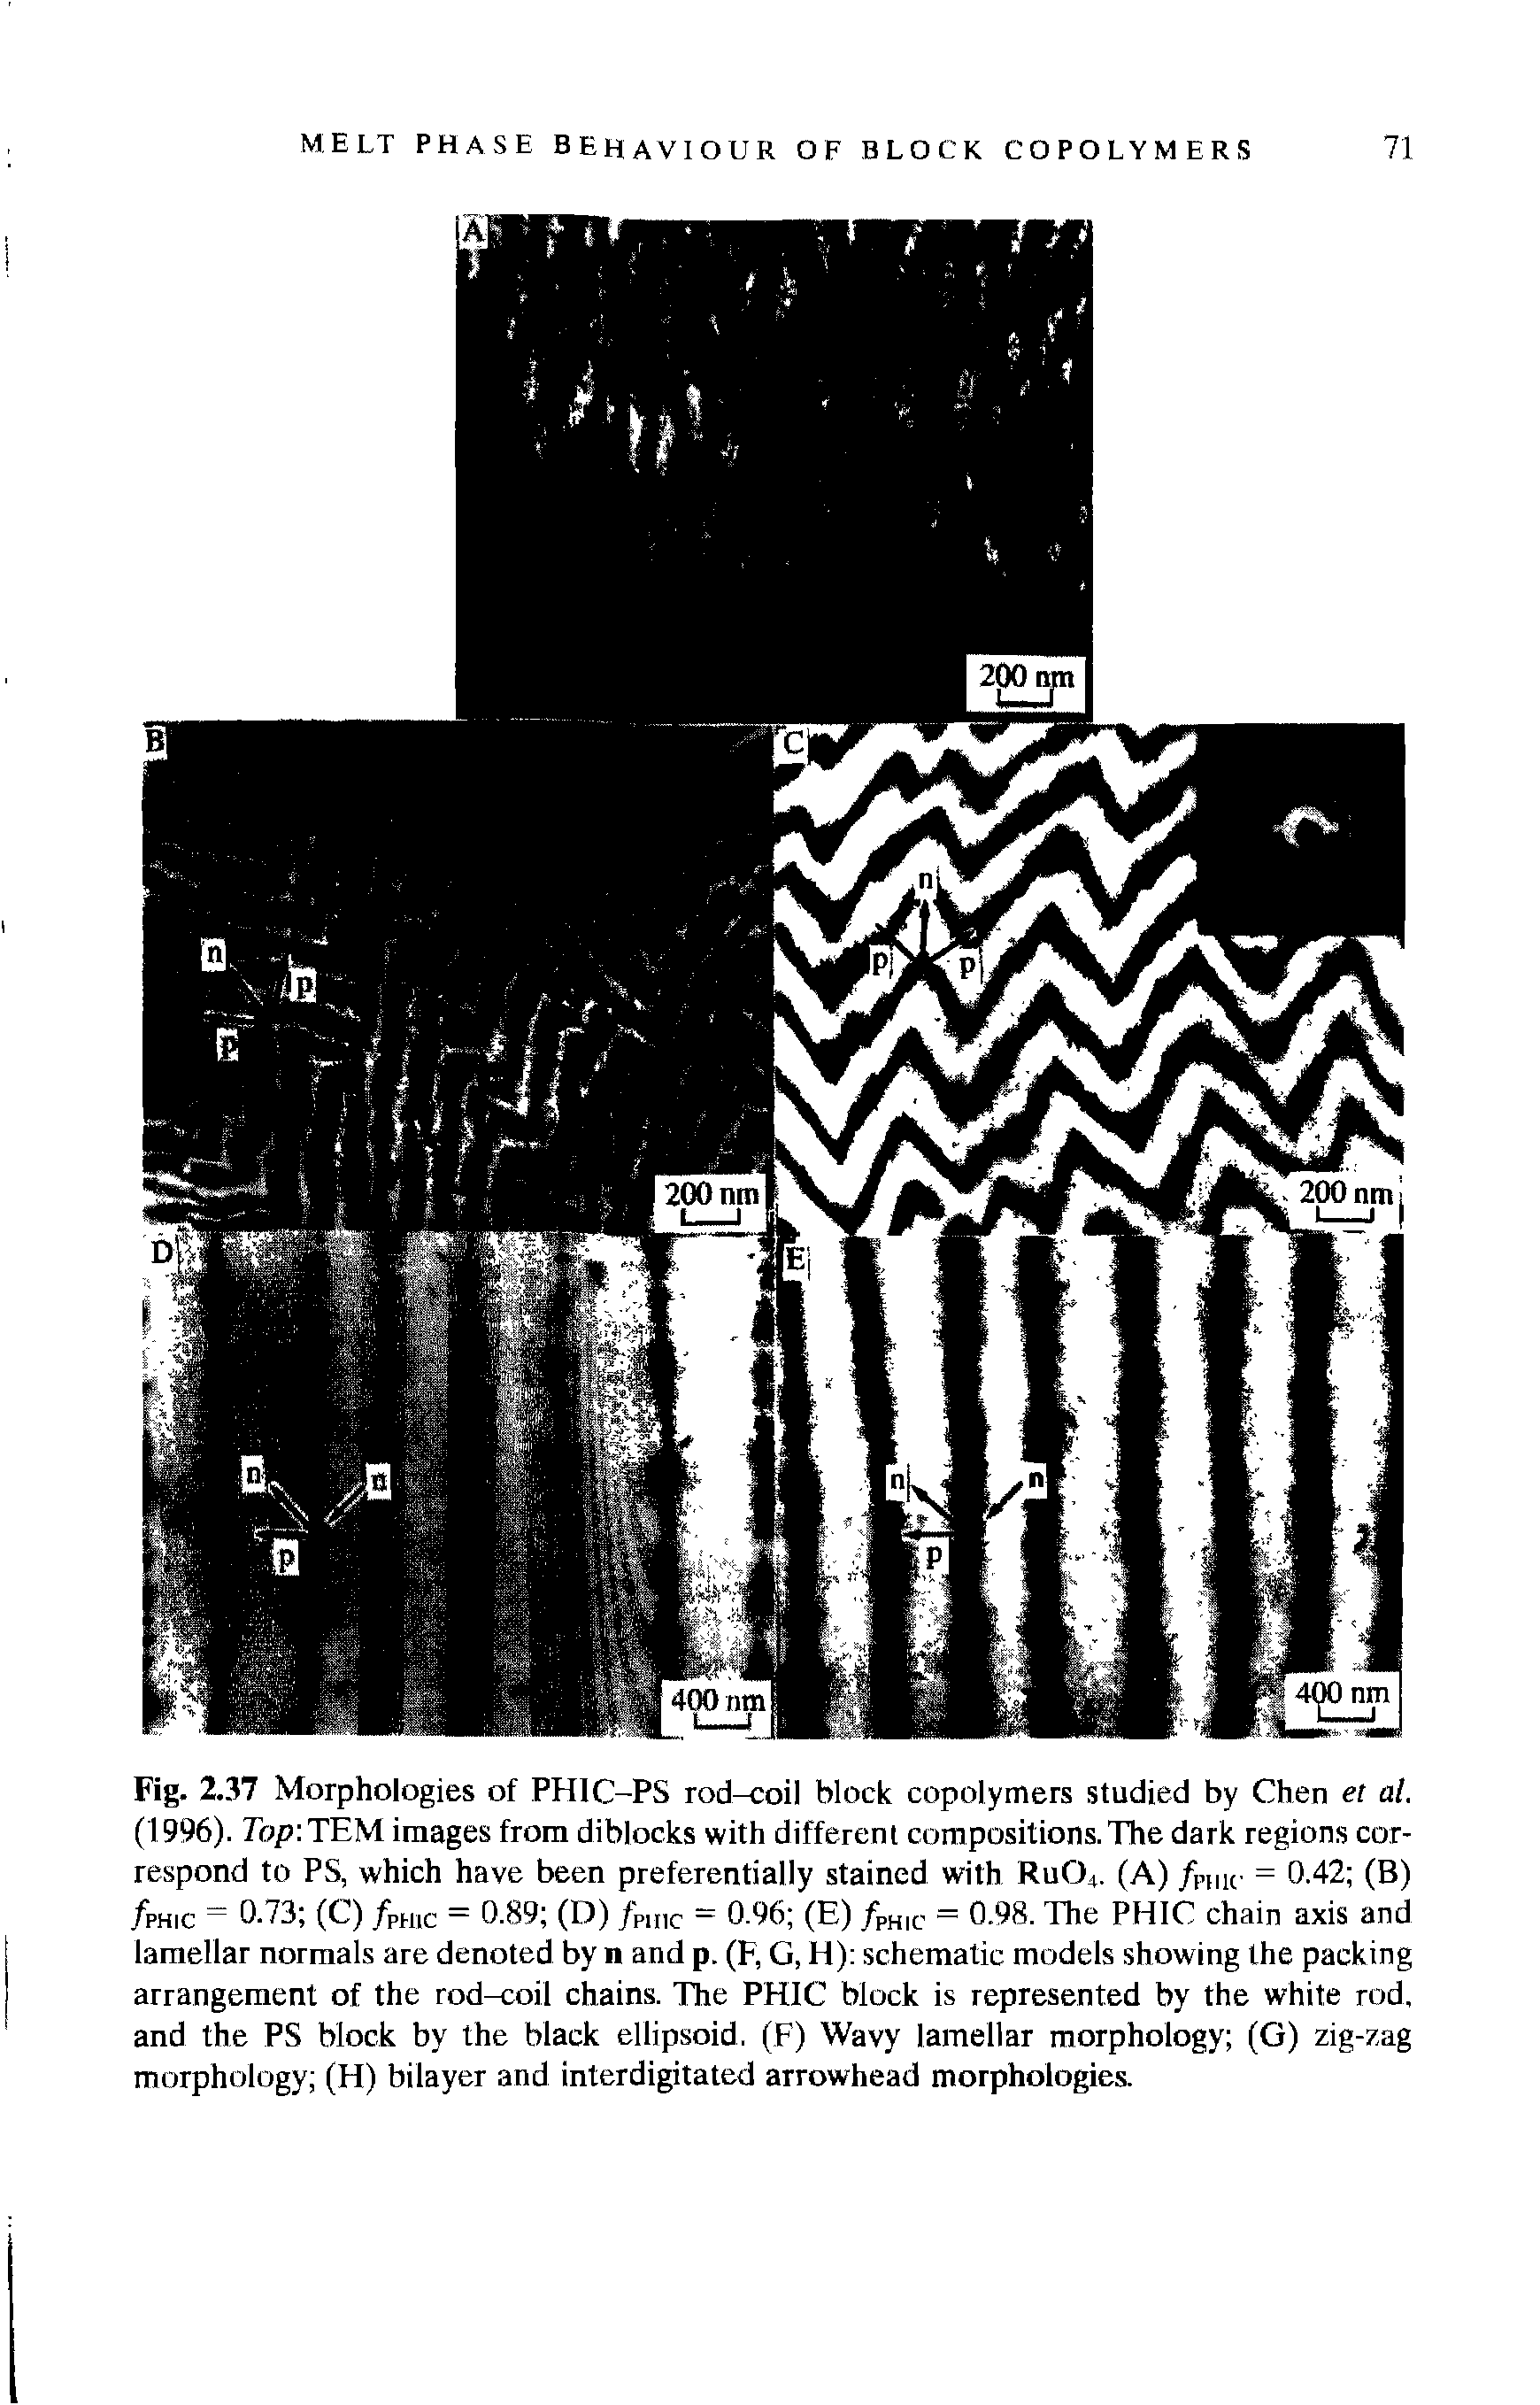 Fig. 2.37 Morphologies of PHIC-PS rod-coil block copolymers studied by Chen et al. (1996). 7bp TEM images from diblocks with different compositions.The dark regions correspond to PS, which have been preferentially stained with RuG4. (A) /,., K- = 0.42 (B) /PHIC = 0.73 (C) /pH,c = 0.89 (D) /Pmc = 0.96 (E) /PHIC = 0.98. The PHIC chain axis and lamellar normals are denoted by n and p. (F, G, H) schematic models showing the packing arrangement of the rod-coil chains. The PHIC block is represented by the white rod, and the PS block by the black ellipsoid. (F) Wavy lamellar morphology (G) zig-zag morphology (H) bilayer and interdigitated arrowhead morphologies.